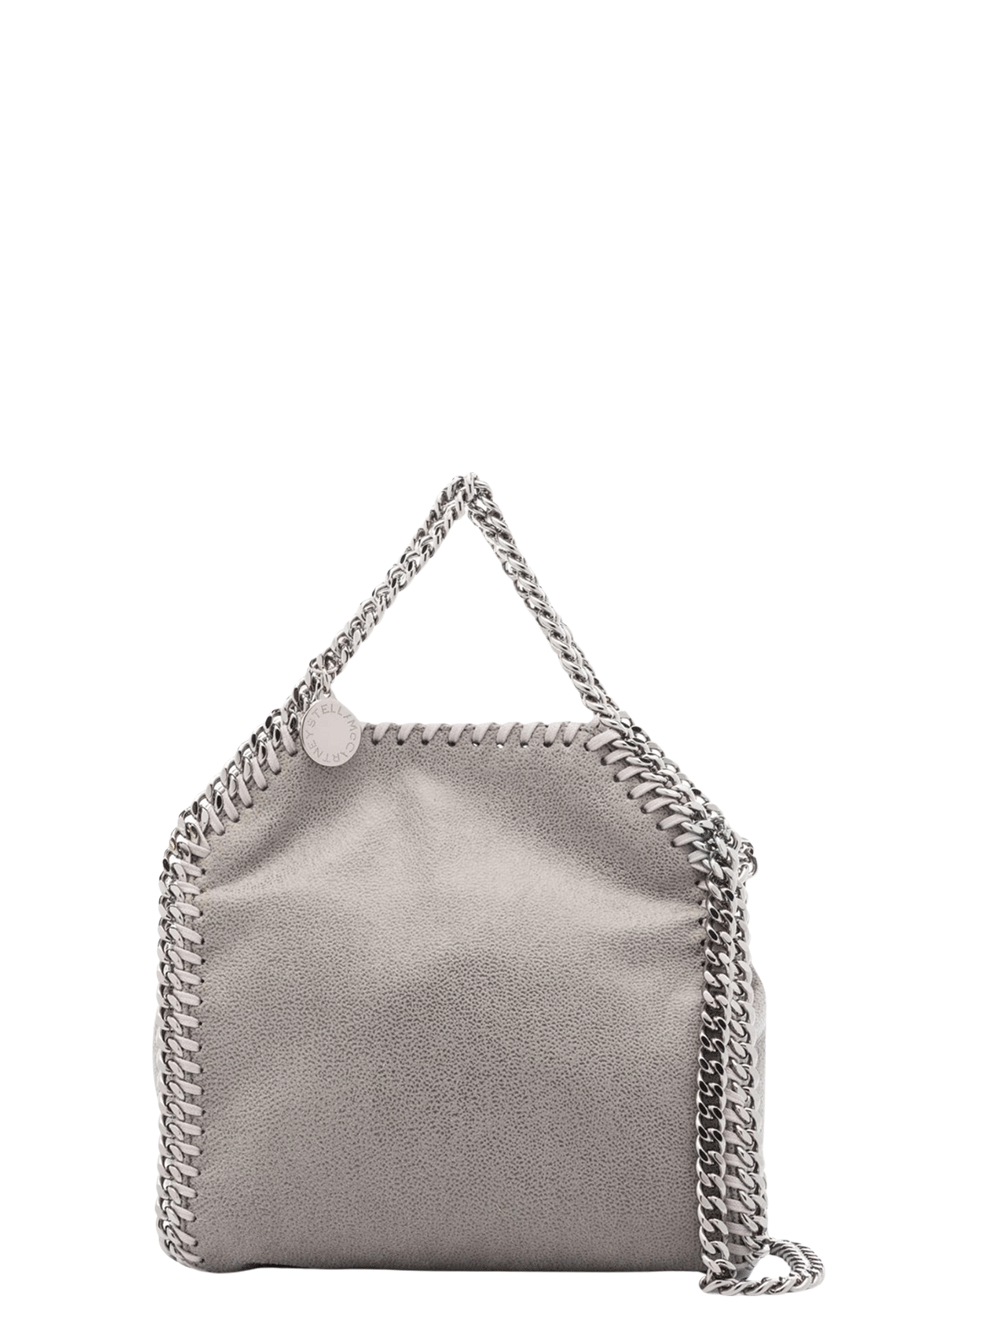 Mulberry-Falabella-Tiny-Tote-Light-Grey-1